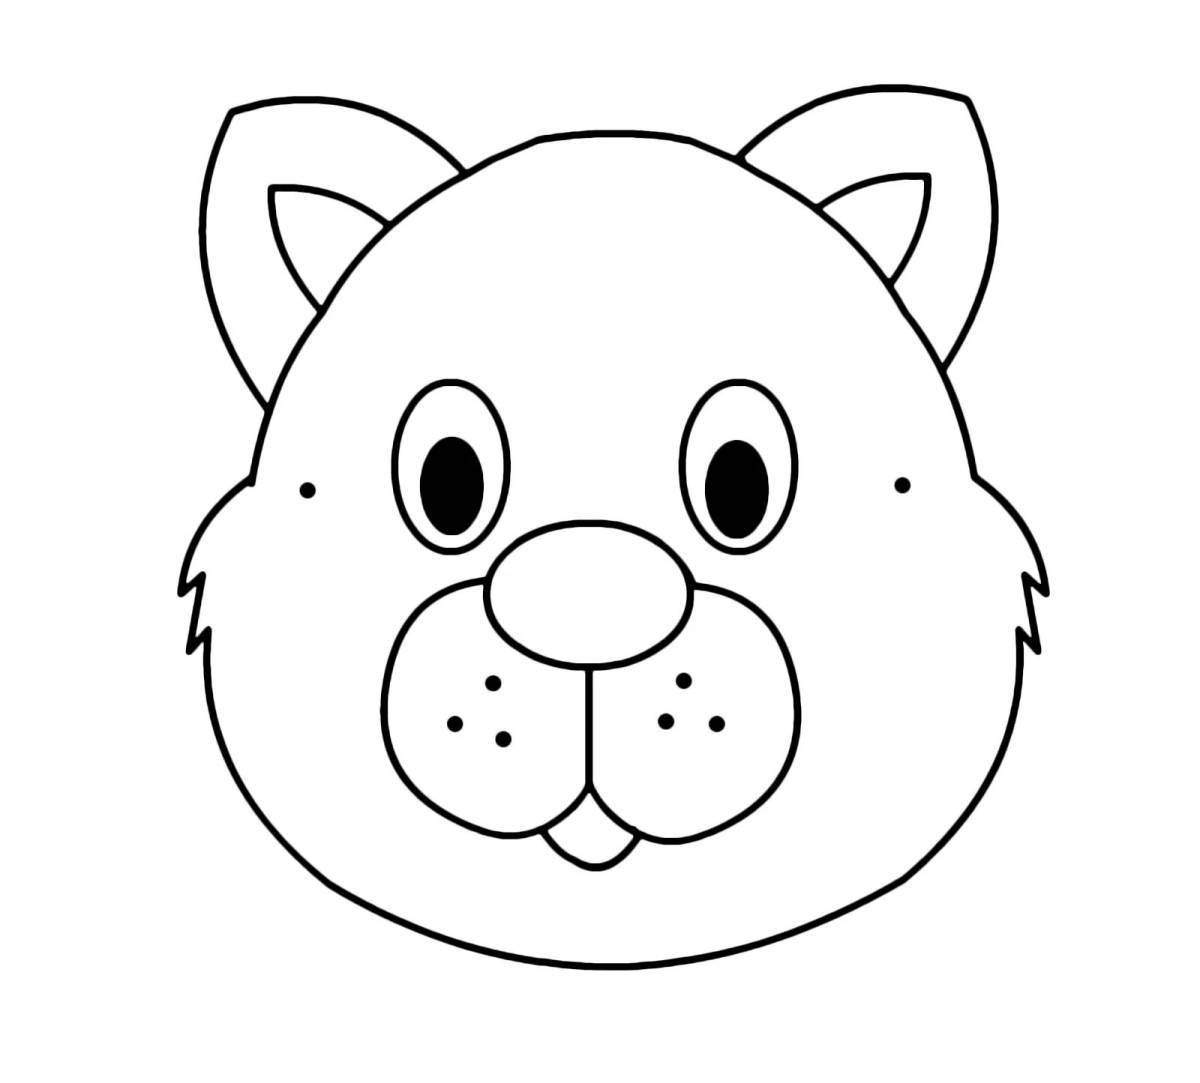 Coloring funny animal mask for kids